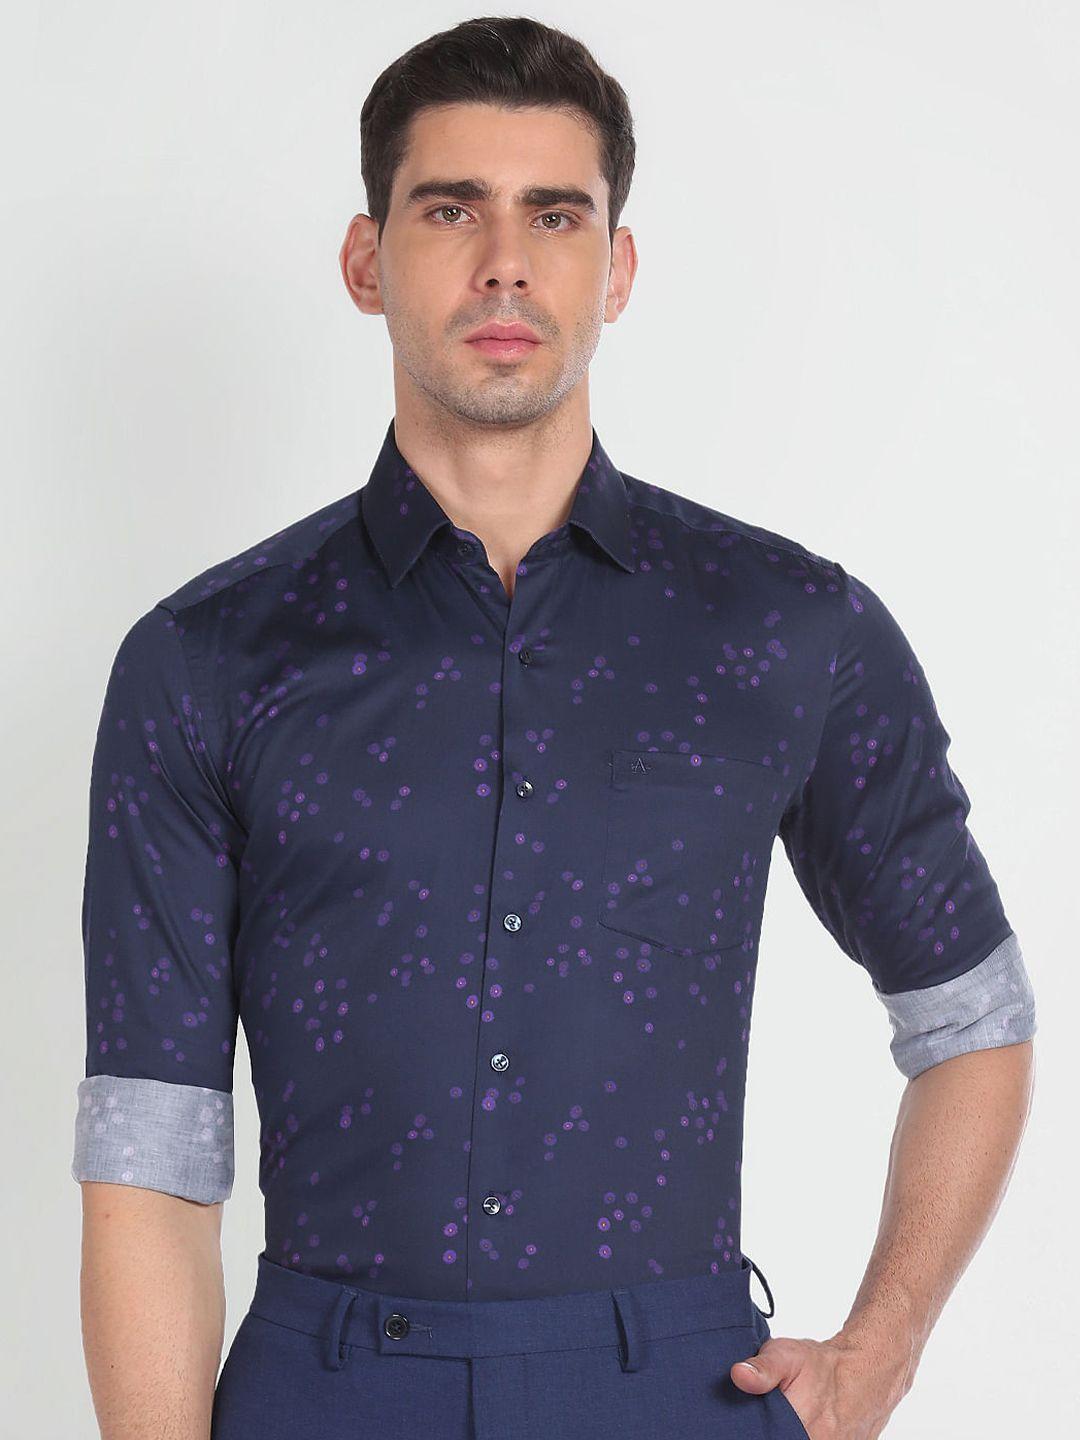 arrow floral printed pure cotton formal shirt